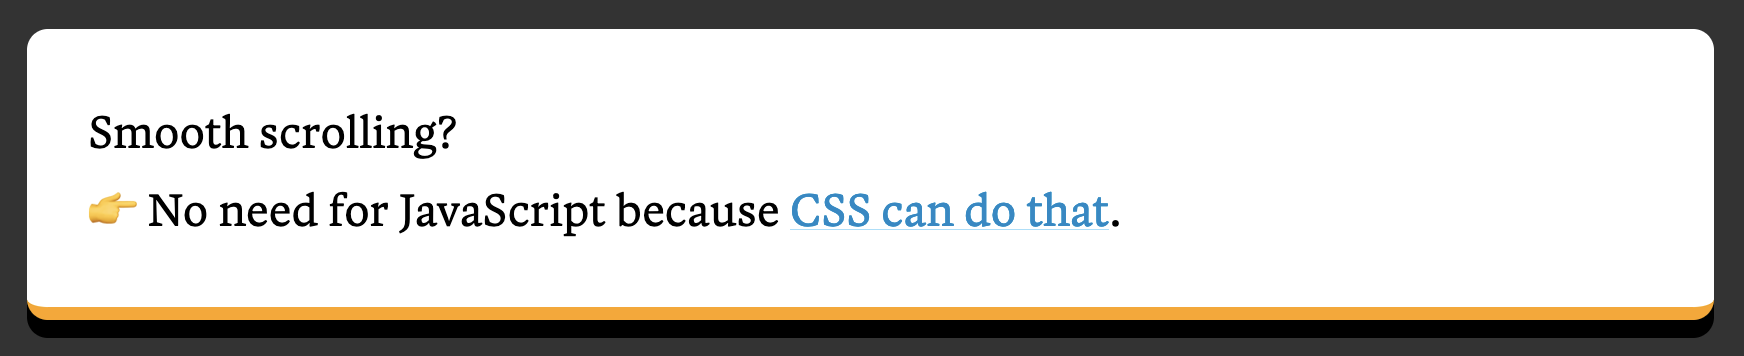 Smooth scrolling? 👉 No need for JavaScript because CSS can do that.